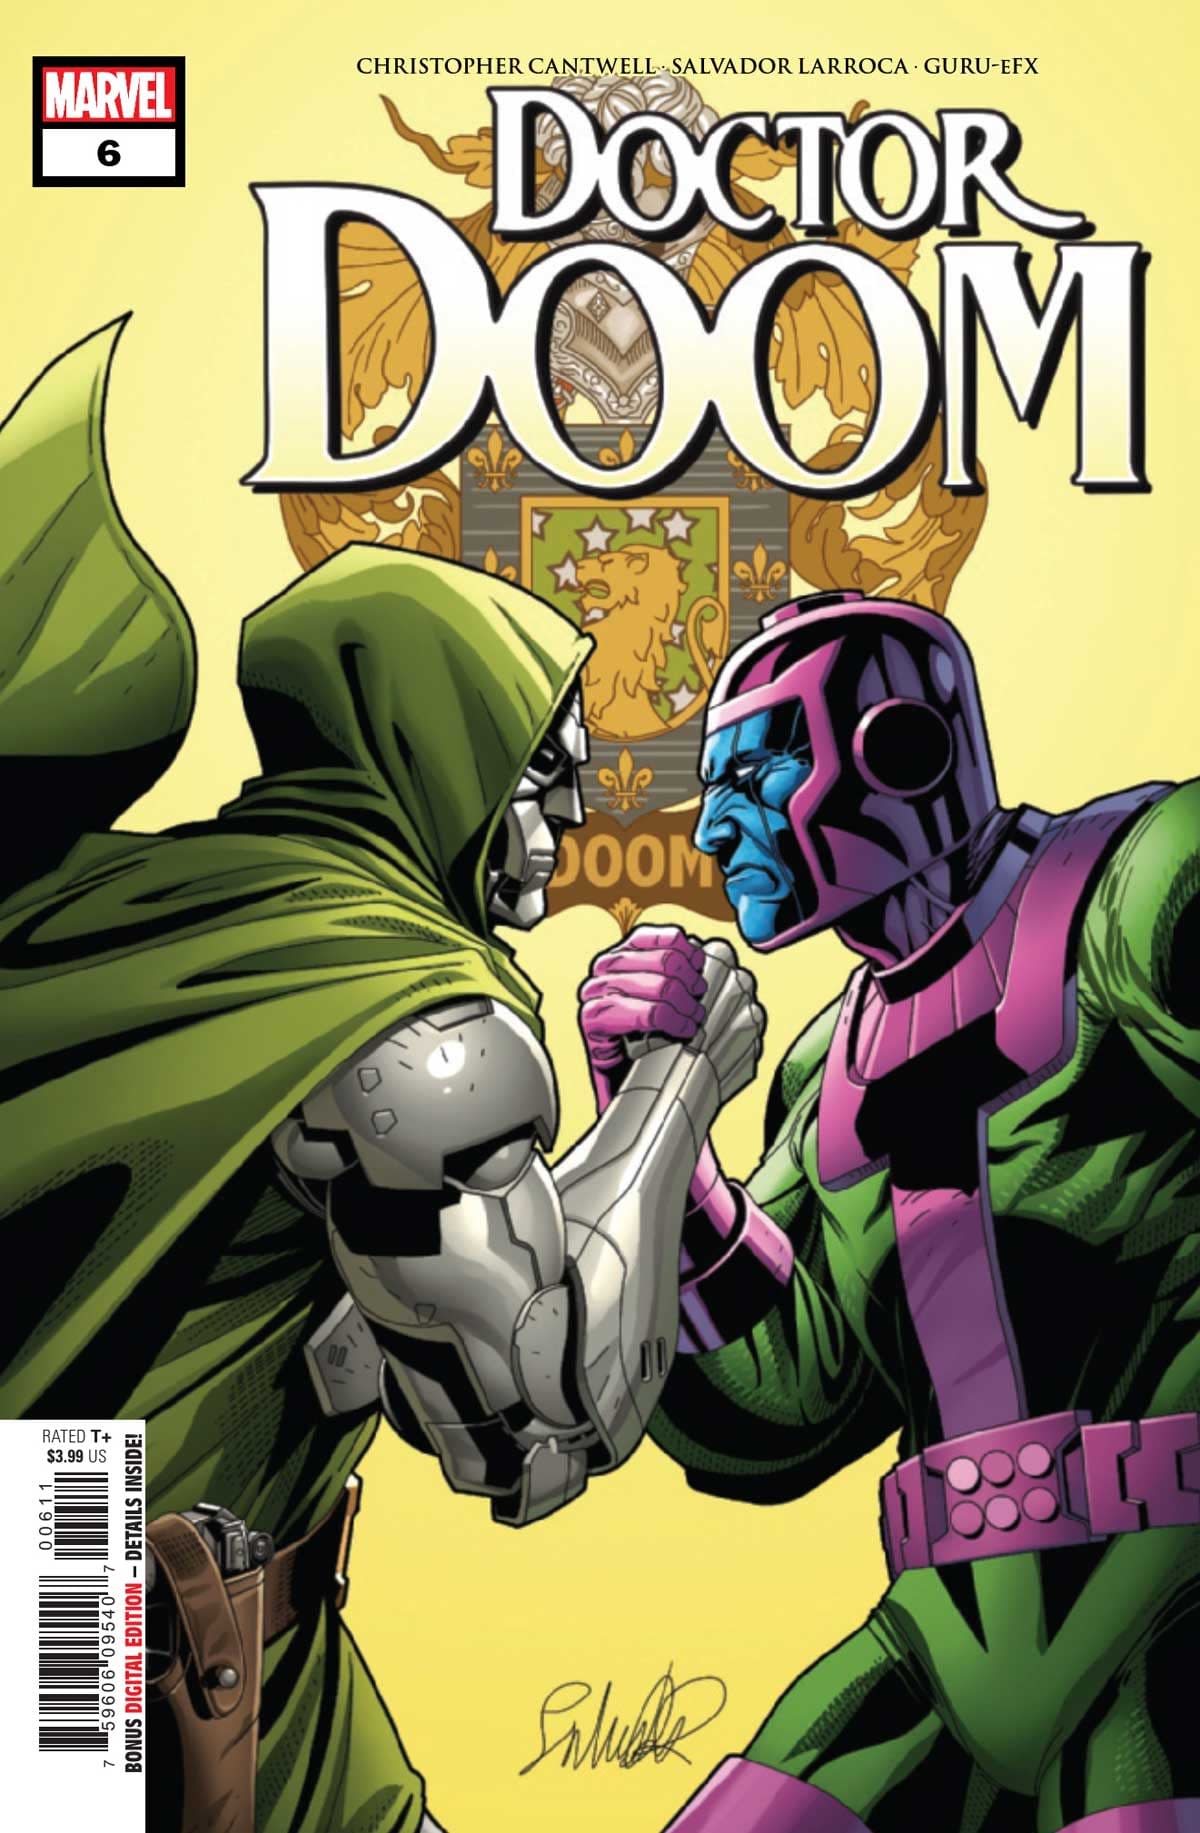 REVIEW: Doctor Doom #6 -- "Doom And Time Traveling Super Villain Kang In A Fugitive Buddy Comedy"